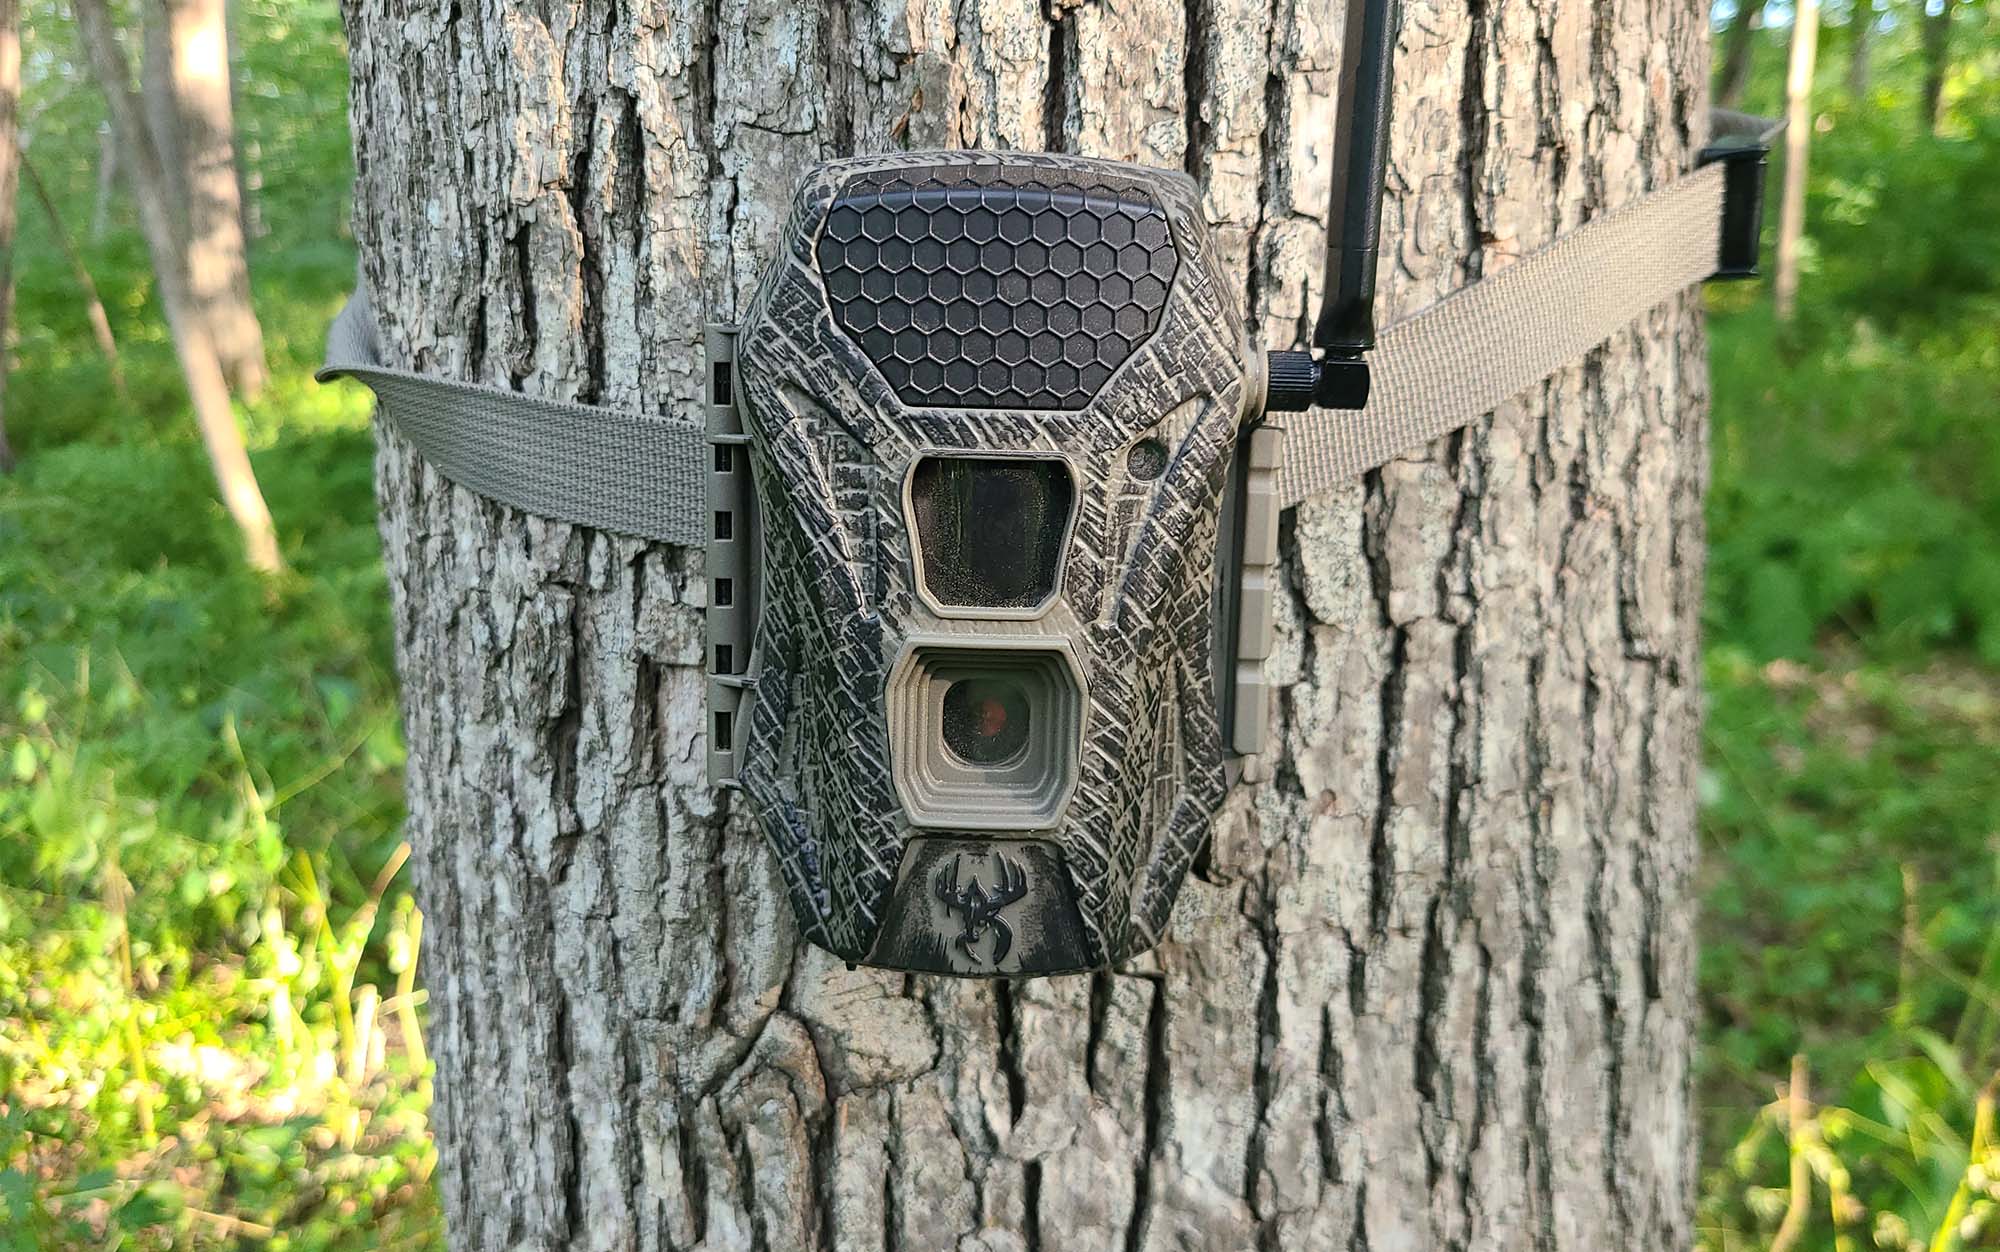 The Wildgame Terra Cell has an 80-foot range.